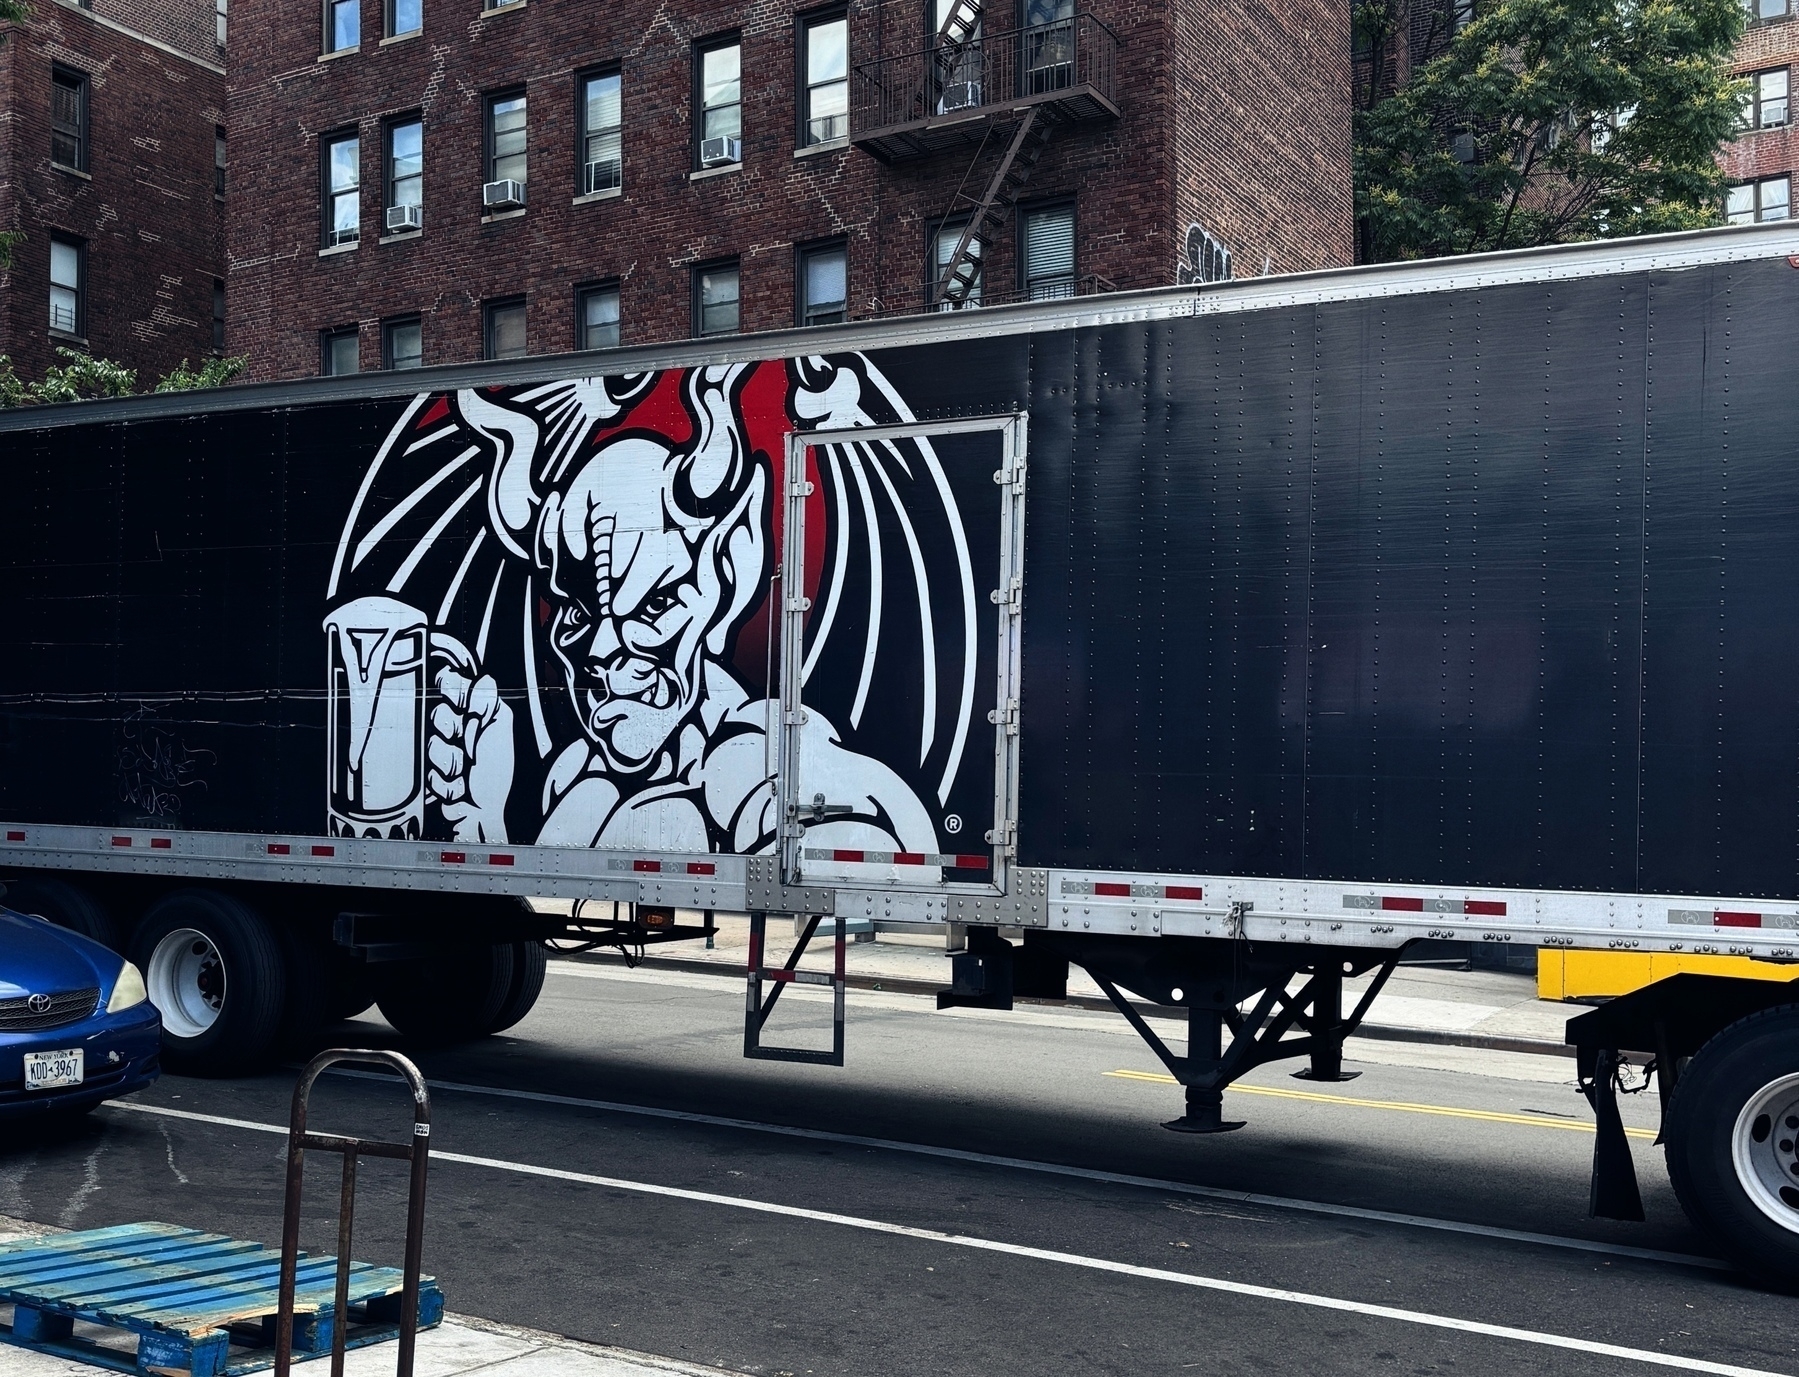 A large black trailer features a graphic of a menacing creature with wings and horns holding a mug against a backdrop of an urban street with brick buildings.&10;